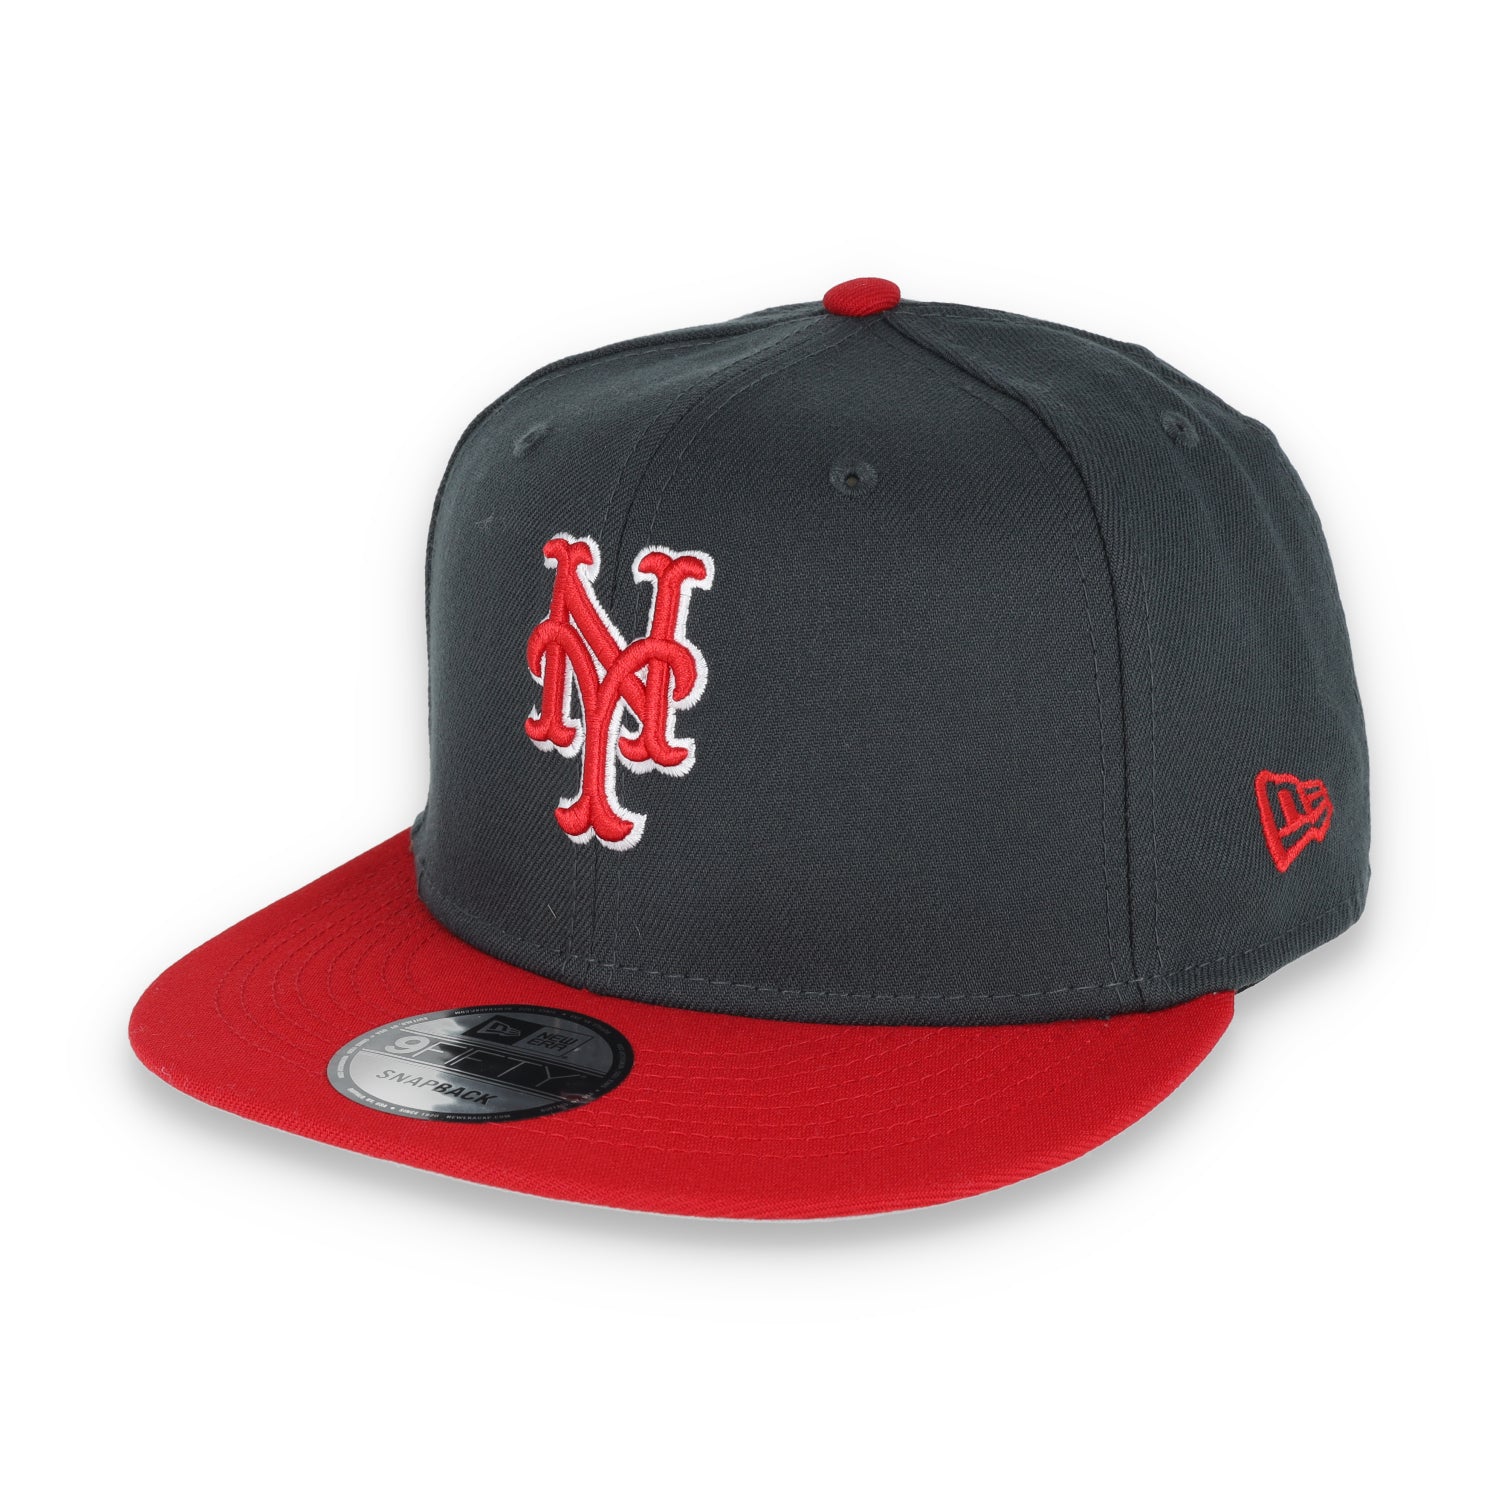 New Era New York Mets 2-Tone Color Pack 9FIFTY Snapback Hat- Grey/Scarlet